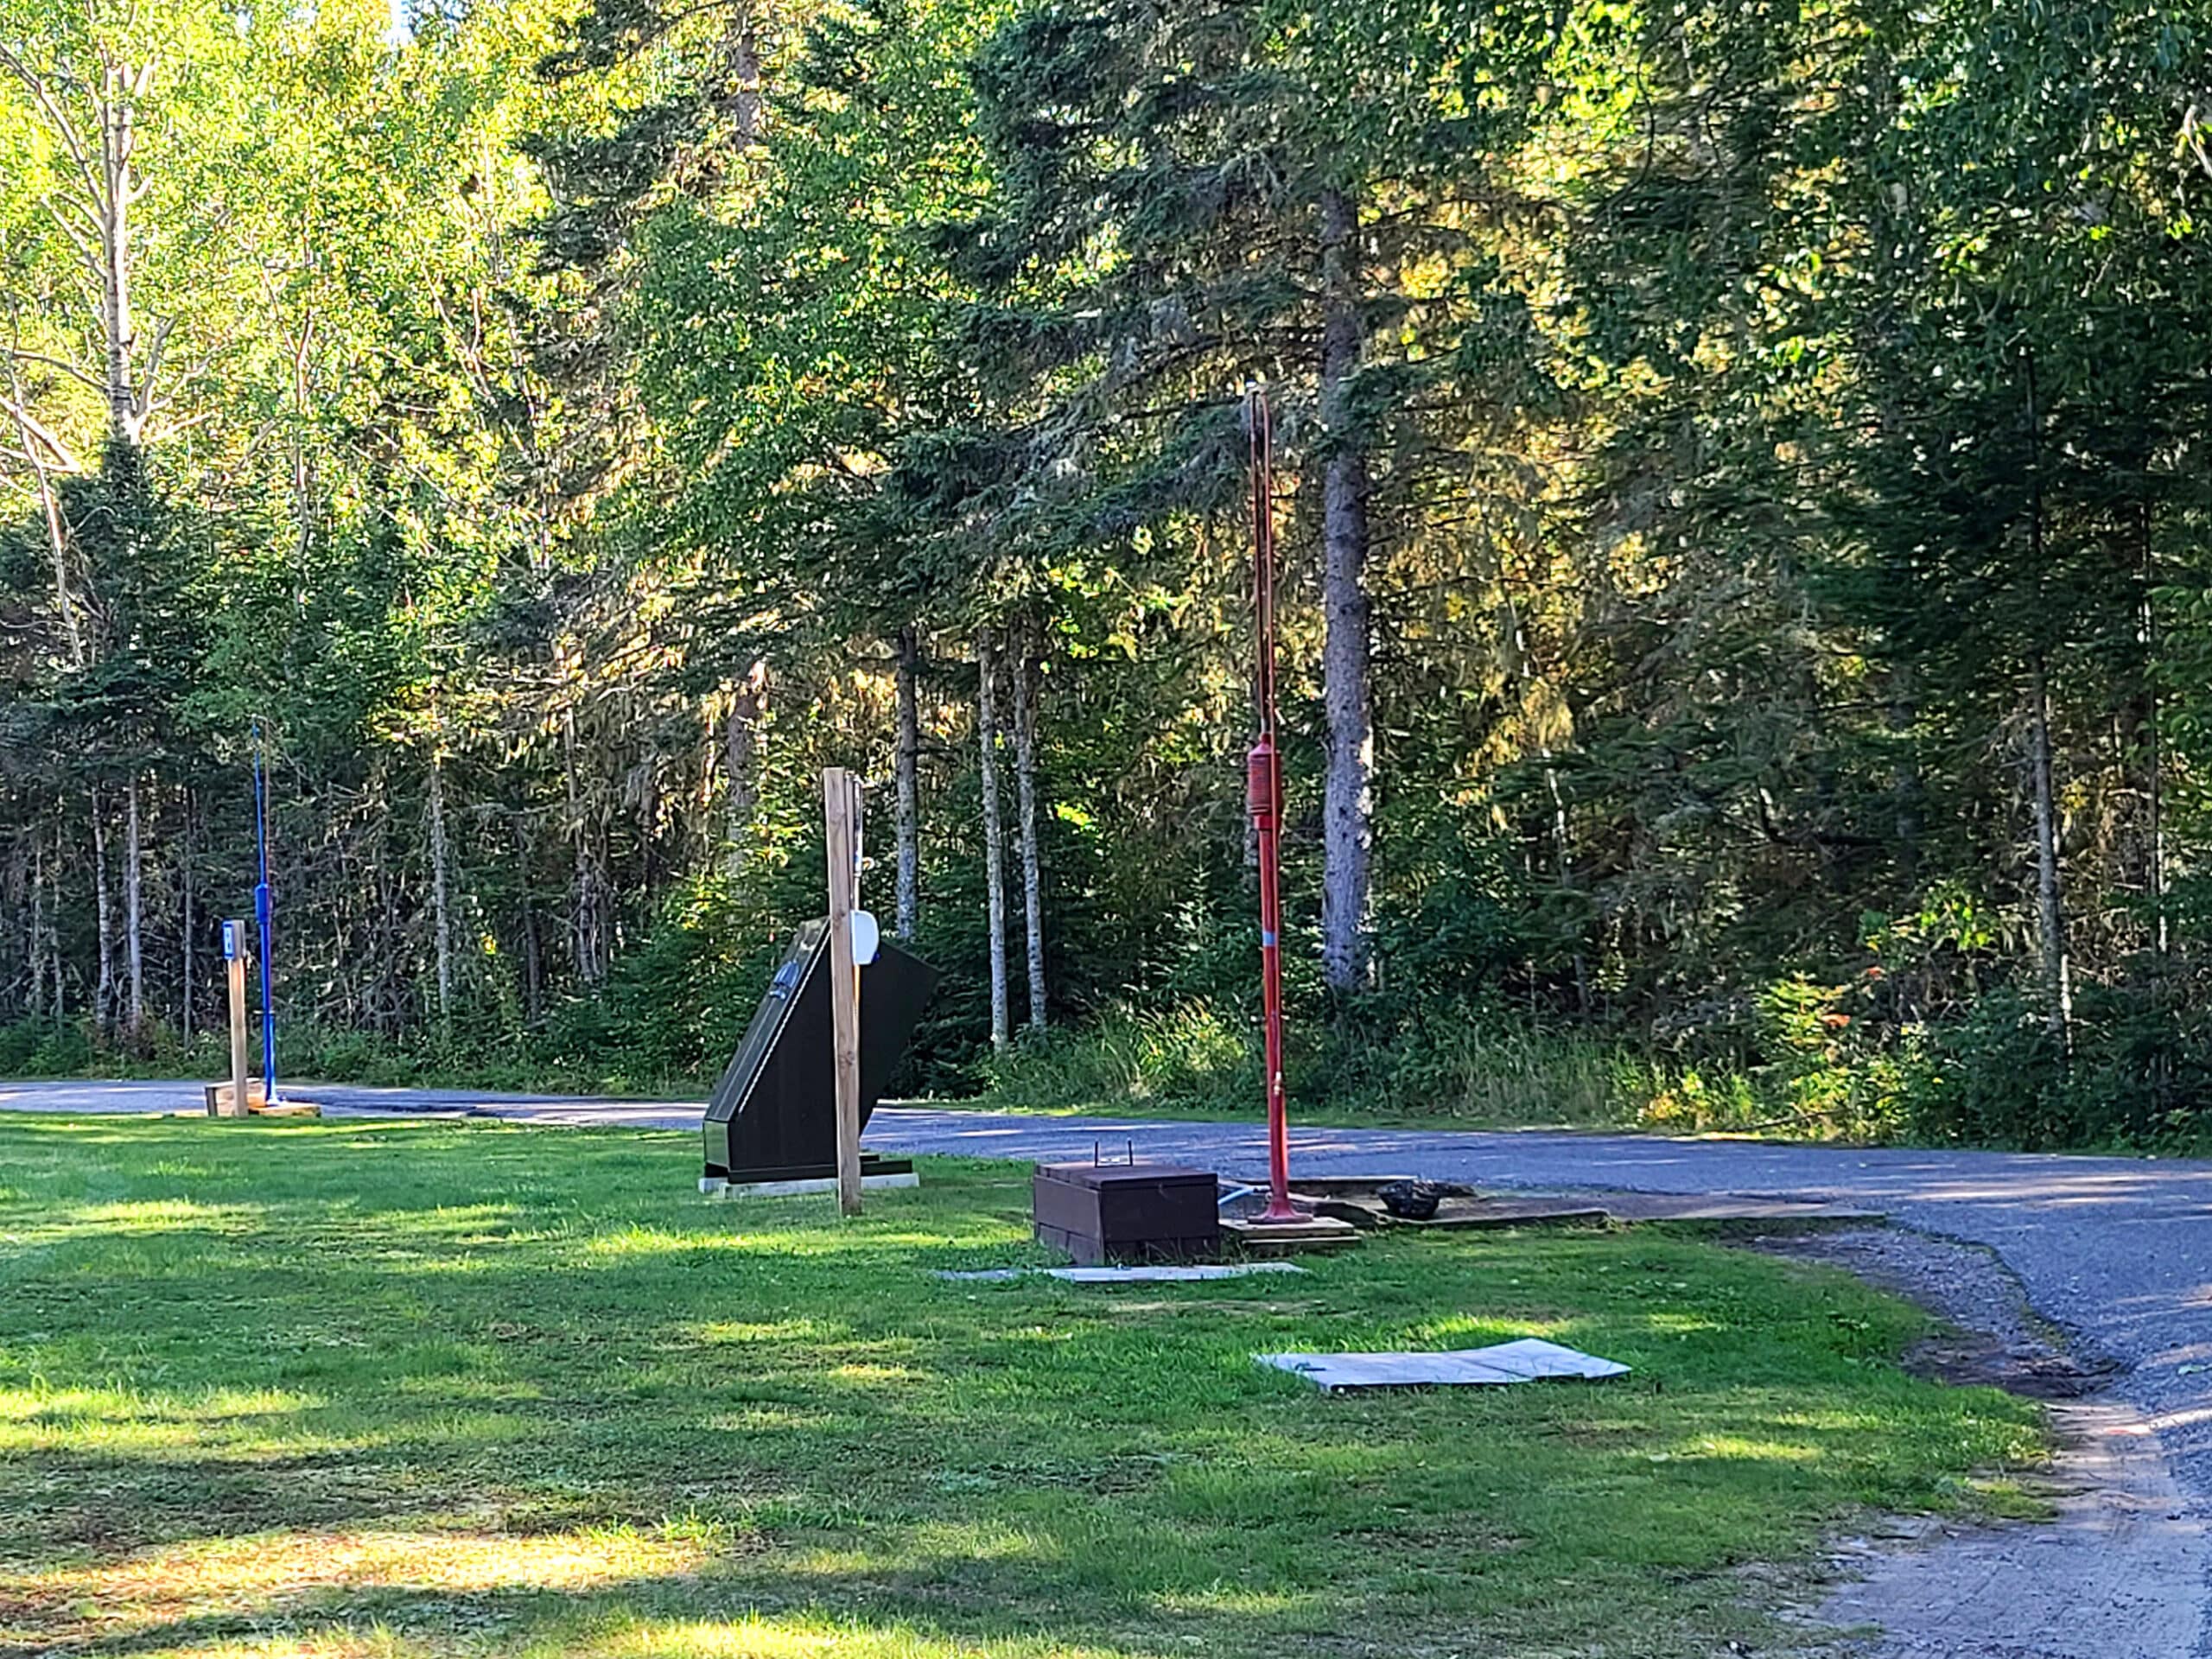 A 2 pedestal dump and fill station in neys provincial park.